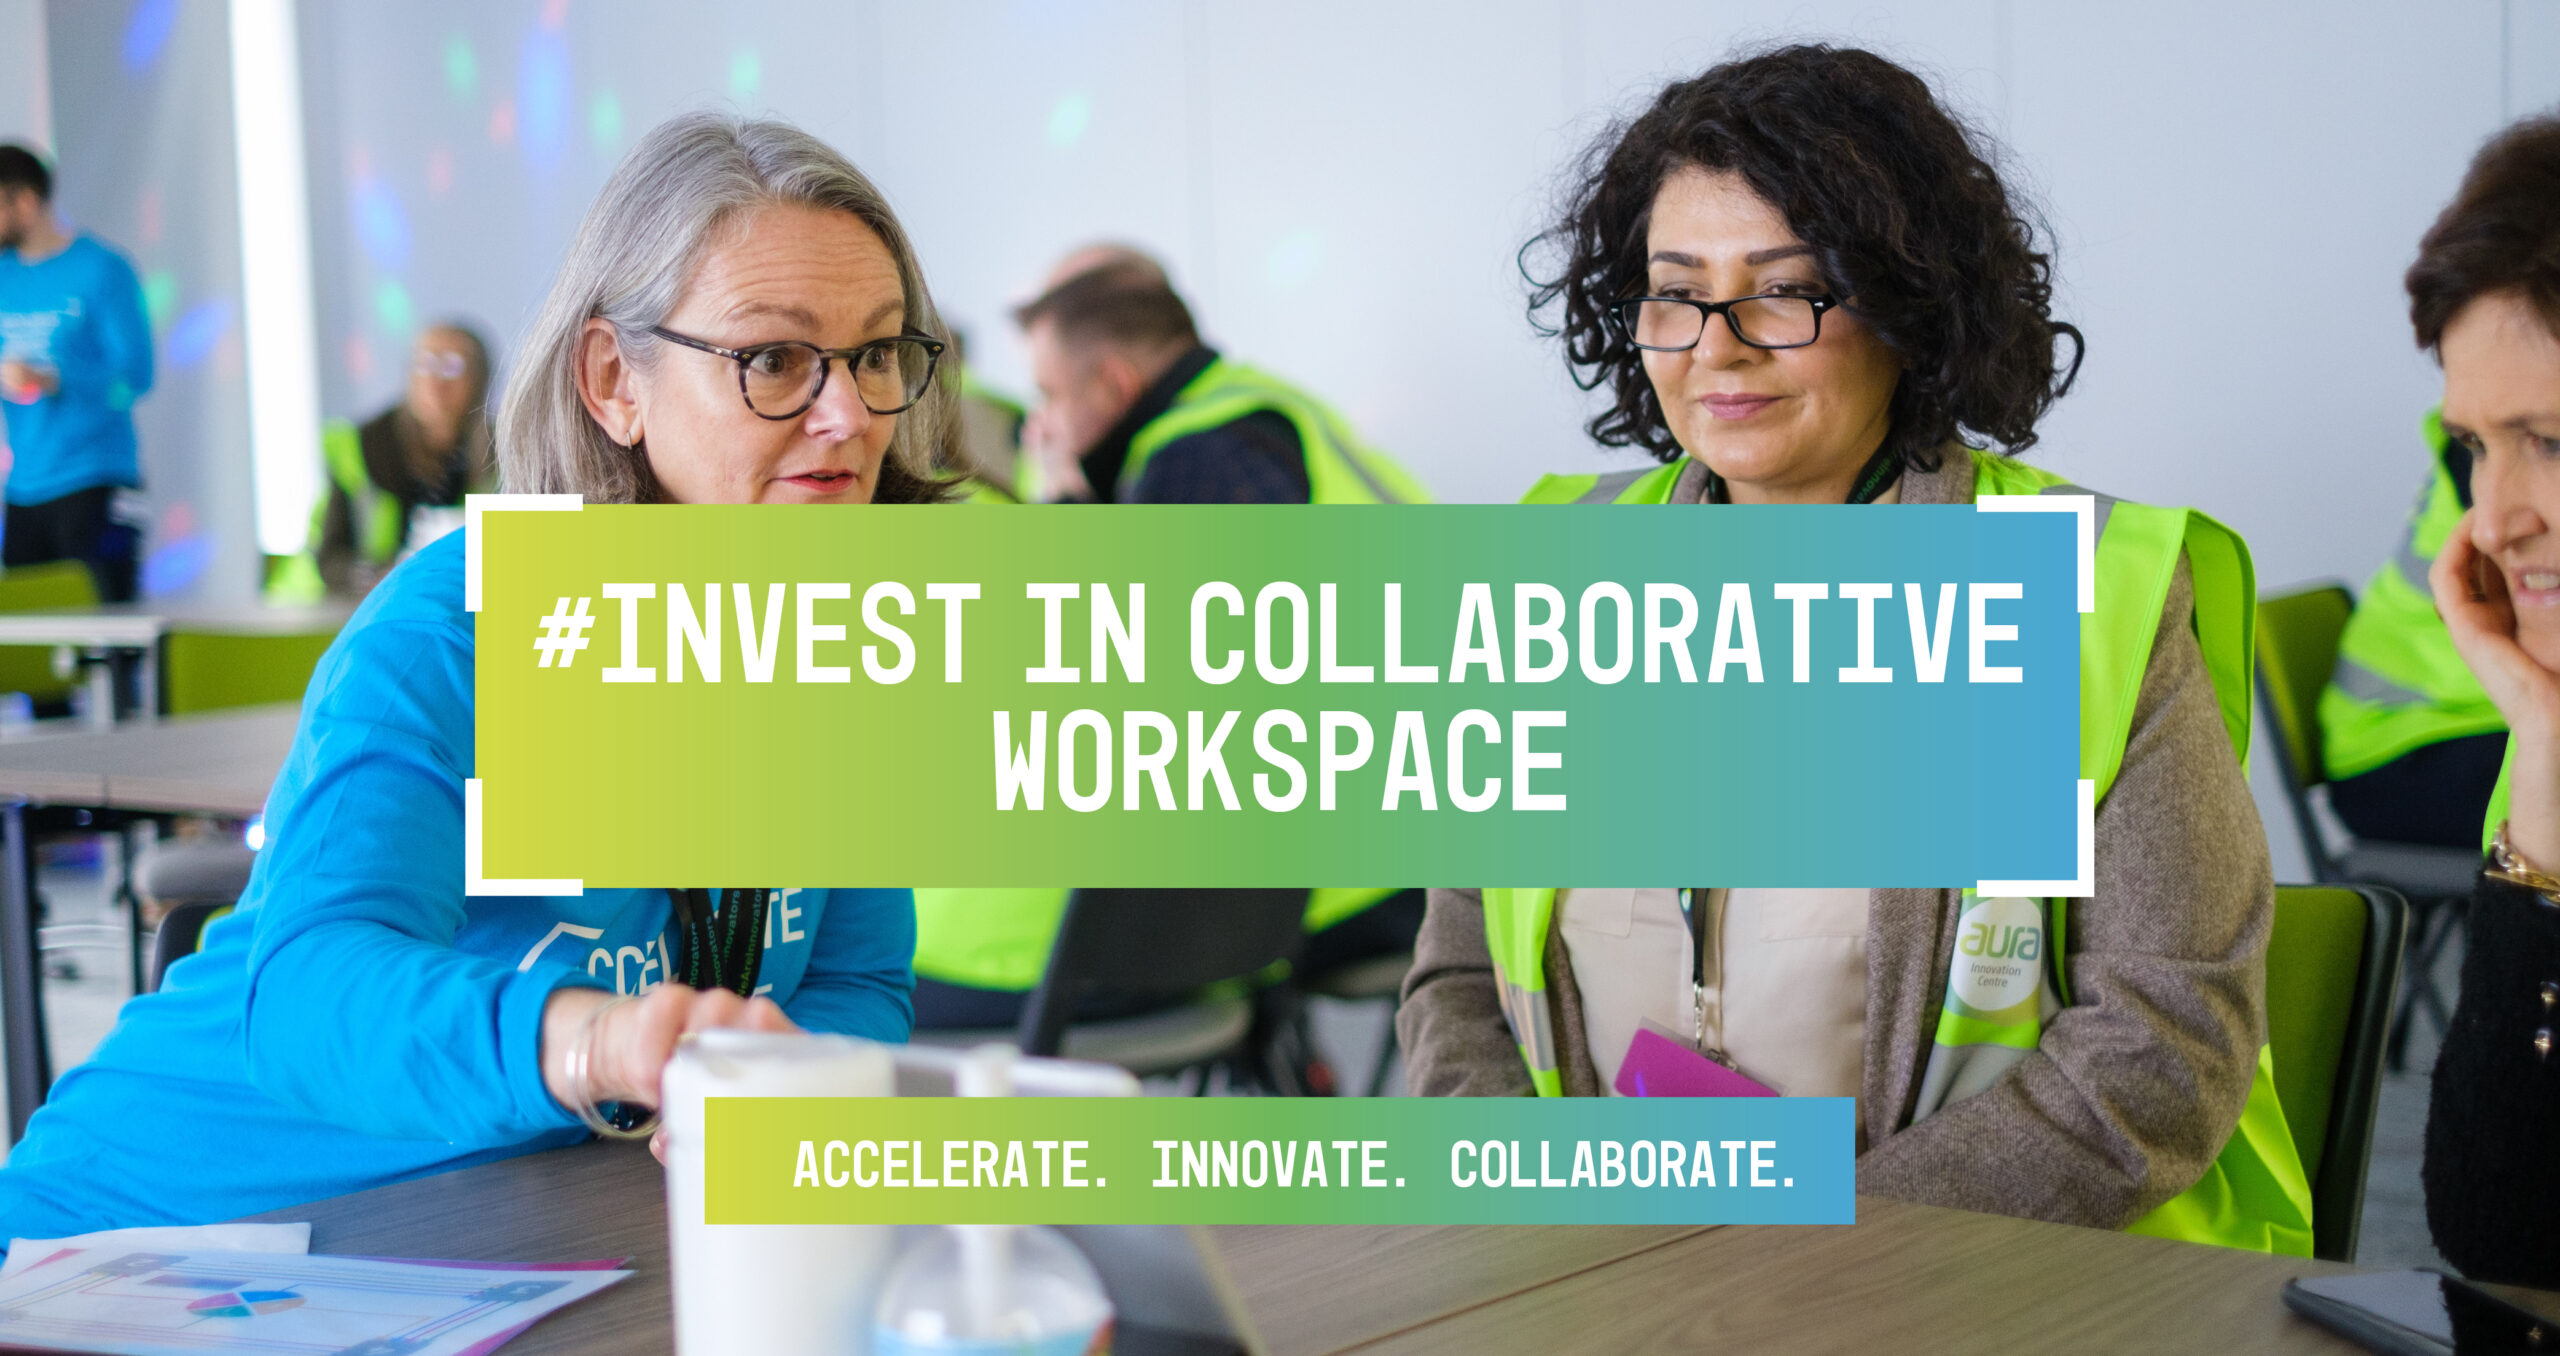 #Invest in collaborative workspace